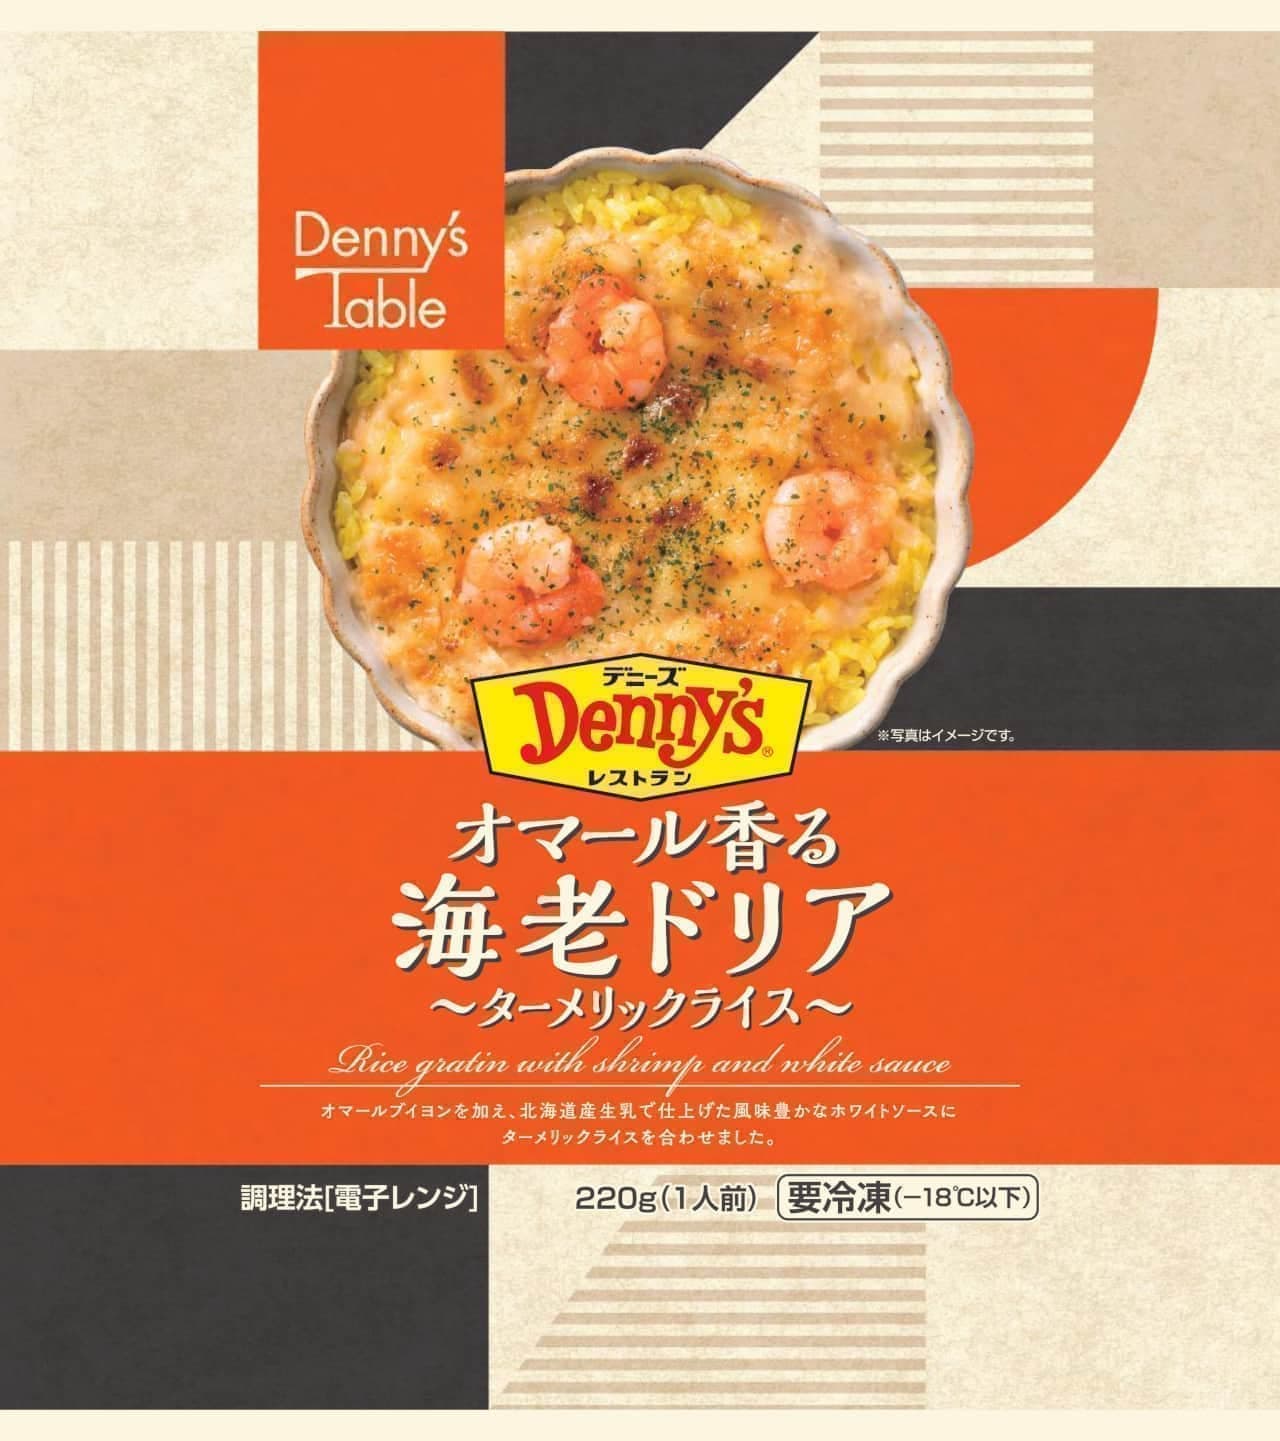 Denny's "Lobster-Scented Shrimp Doria with Turmeric Rice